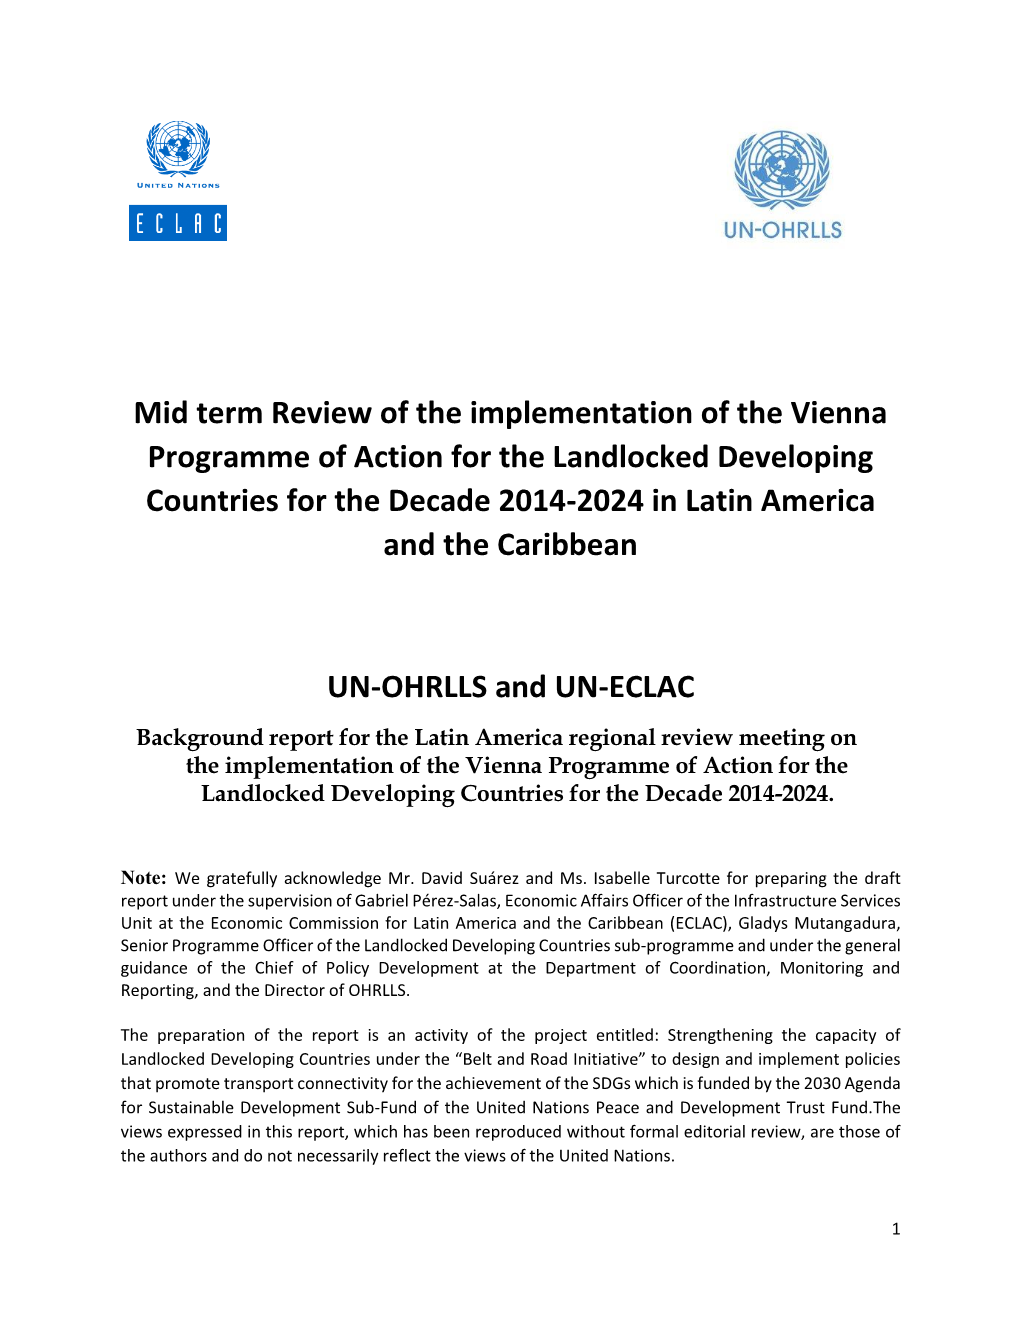 Mid Term Review of the Implementation of the Vienna Programme of Action for the Landlocked Developing Countries for the Decade 2